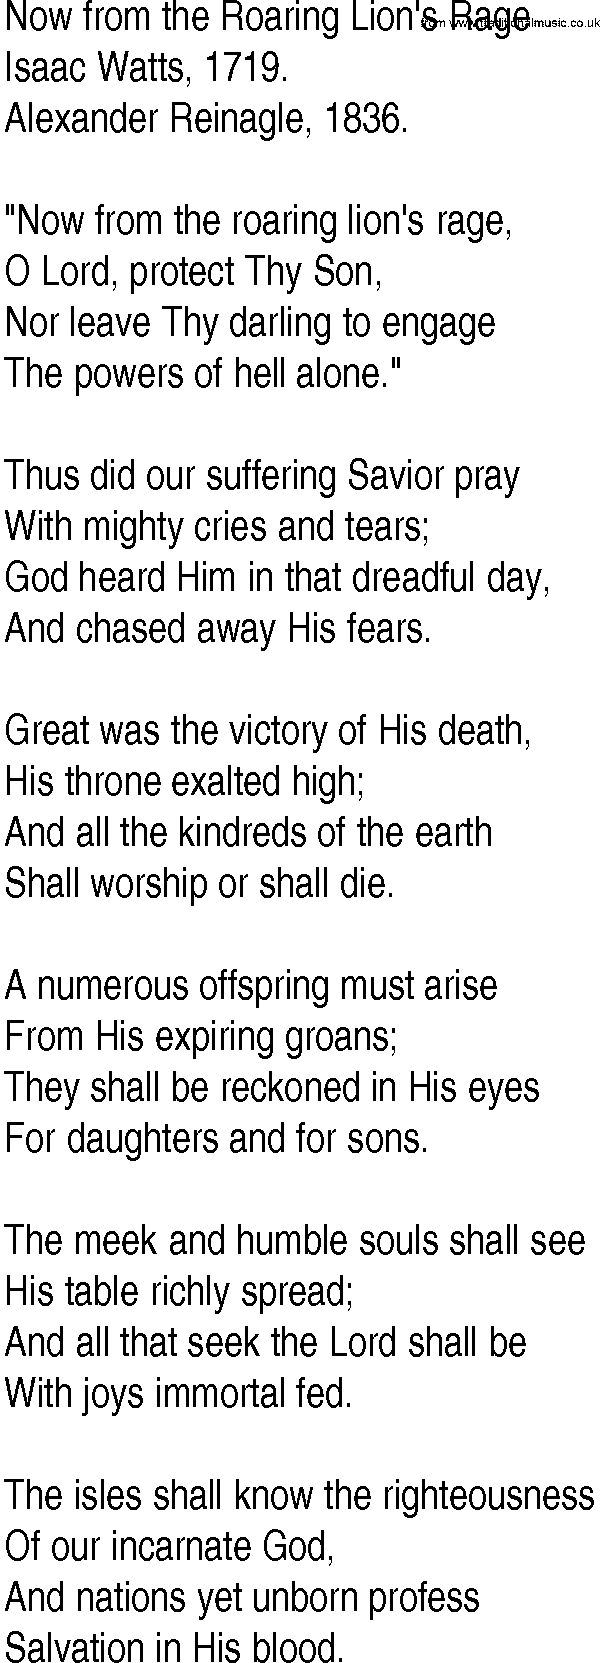 Hymn and Gospel Song: Now from the Roaring Lion's Rage by Isaac Watts lyrics